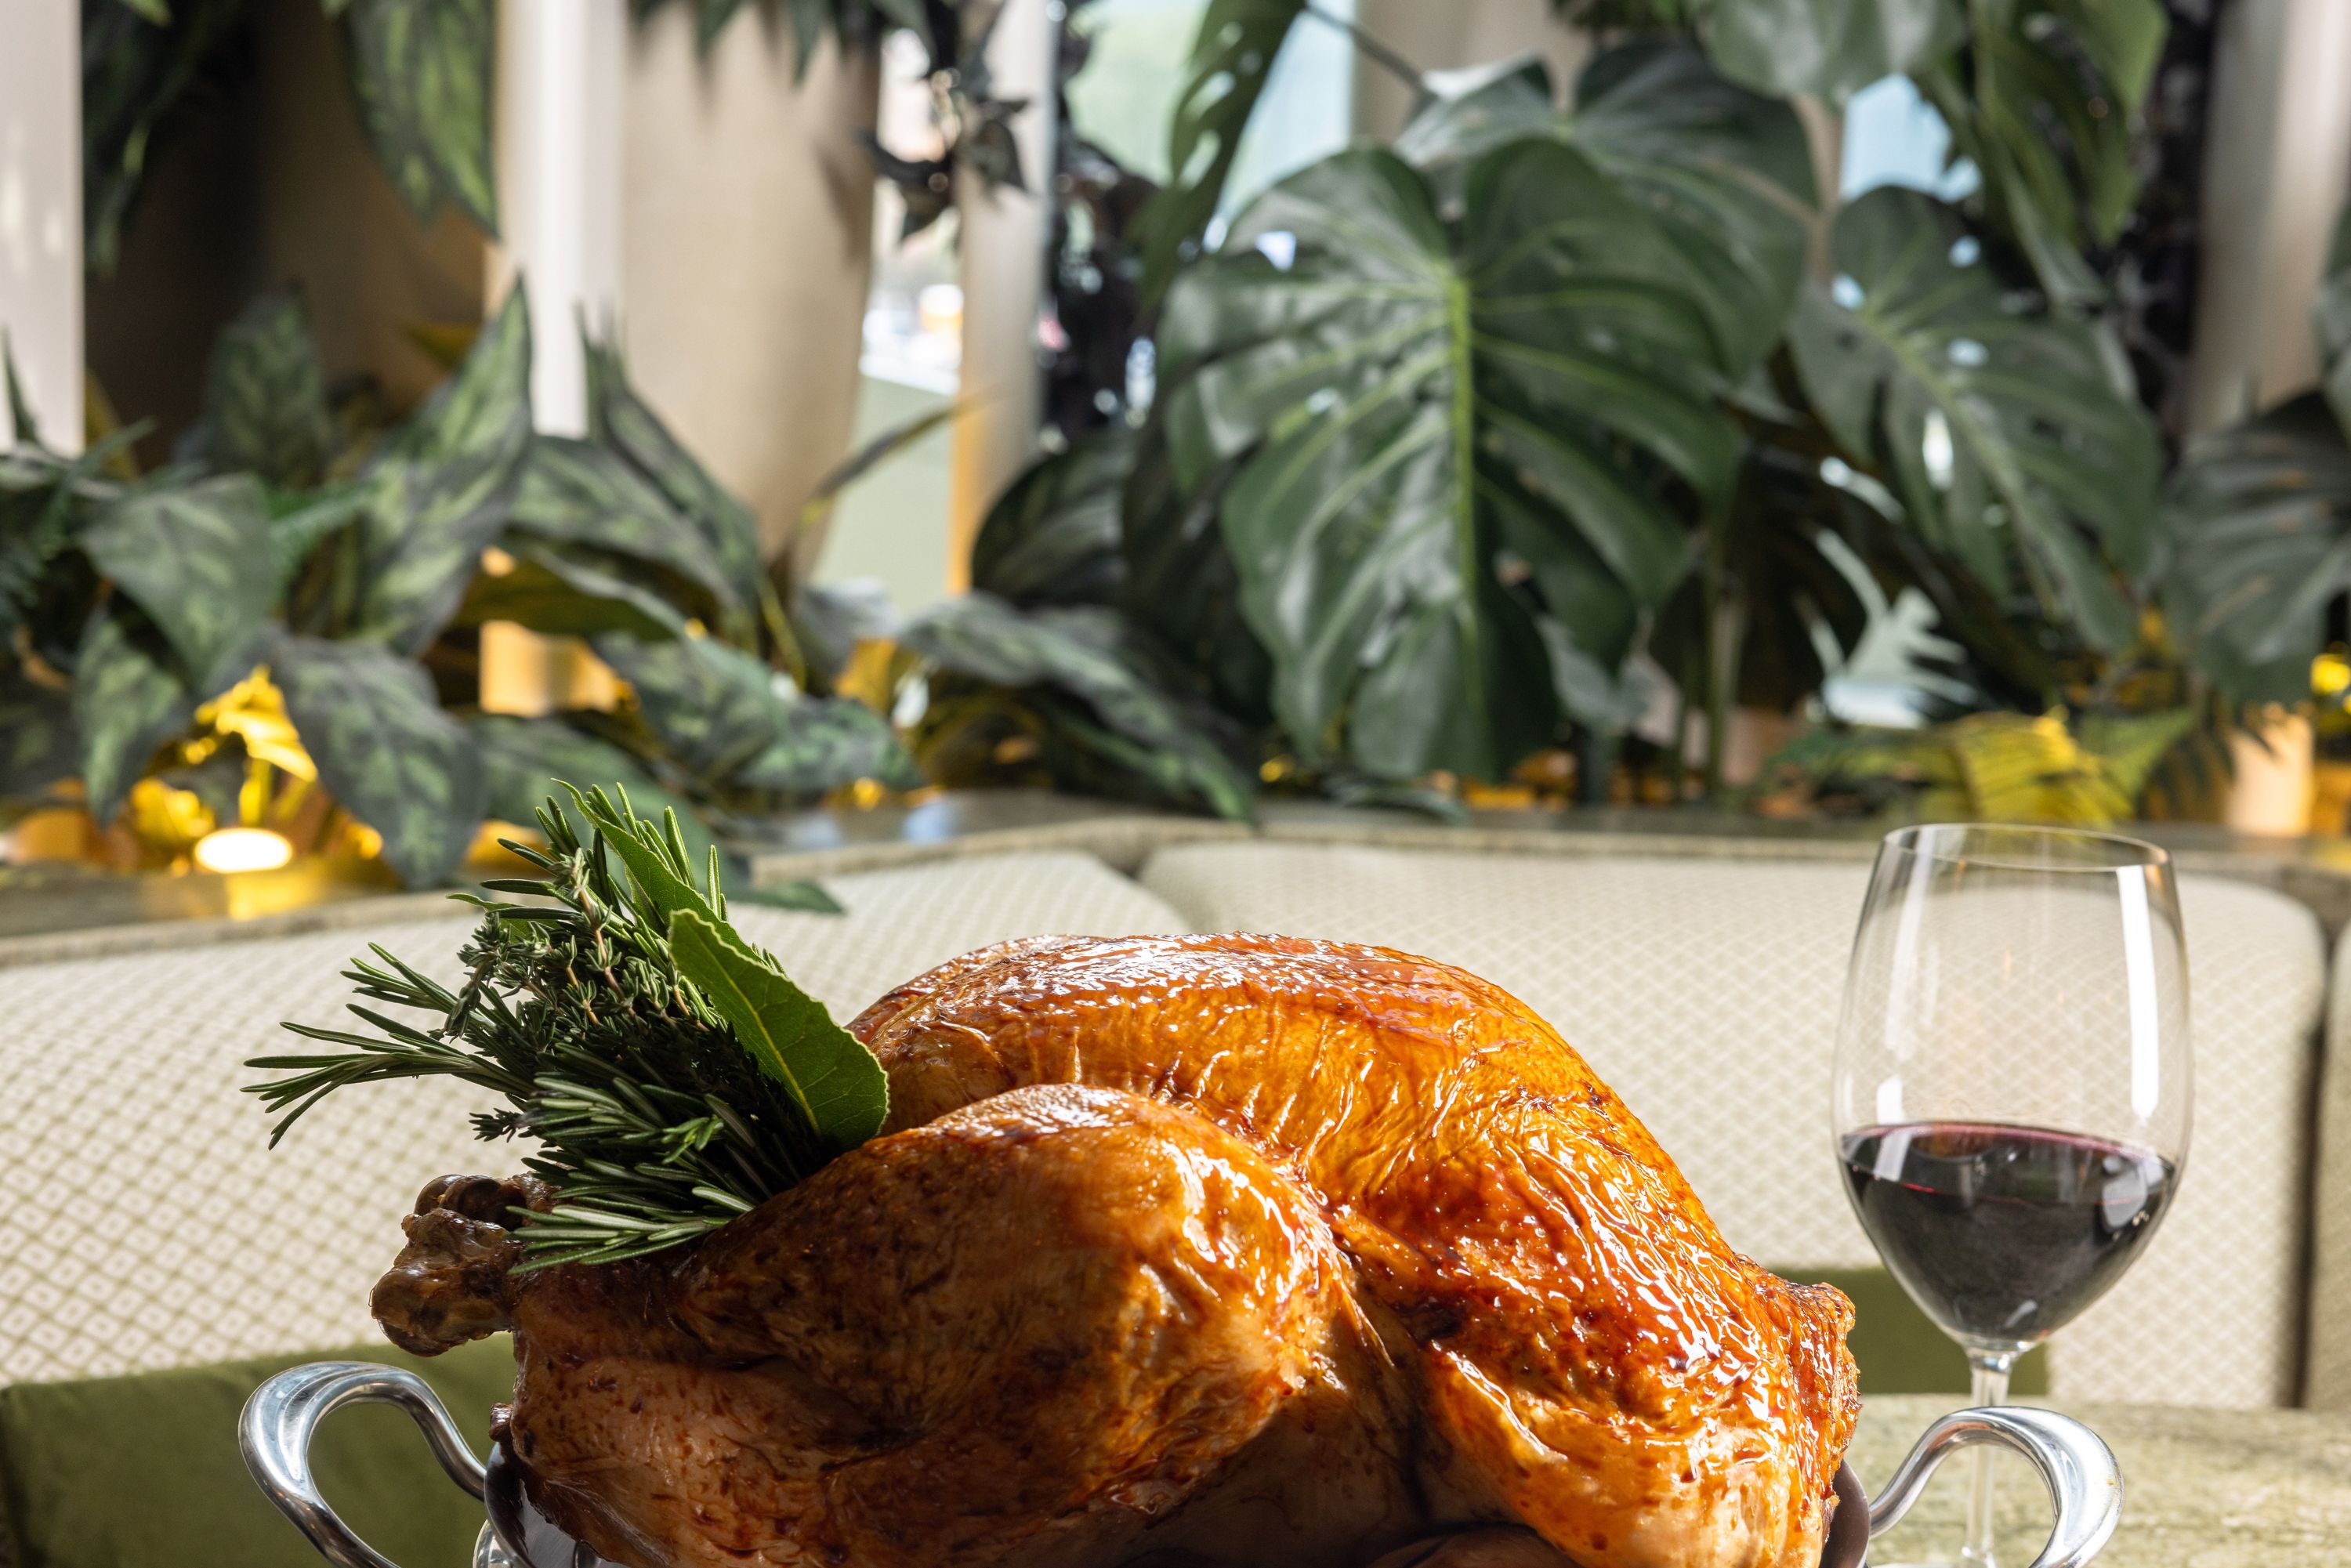 5 Places You Can Pick Up Ready-Made Thanksgiving Dinner